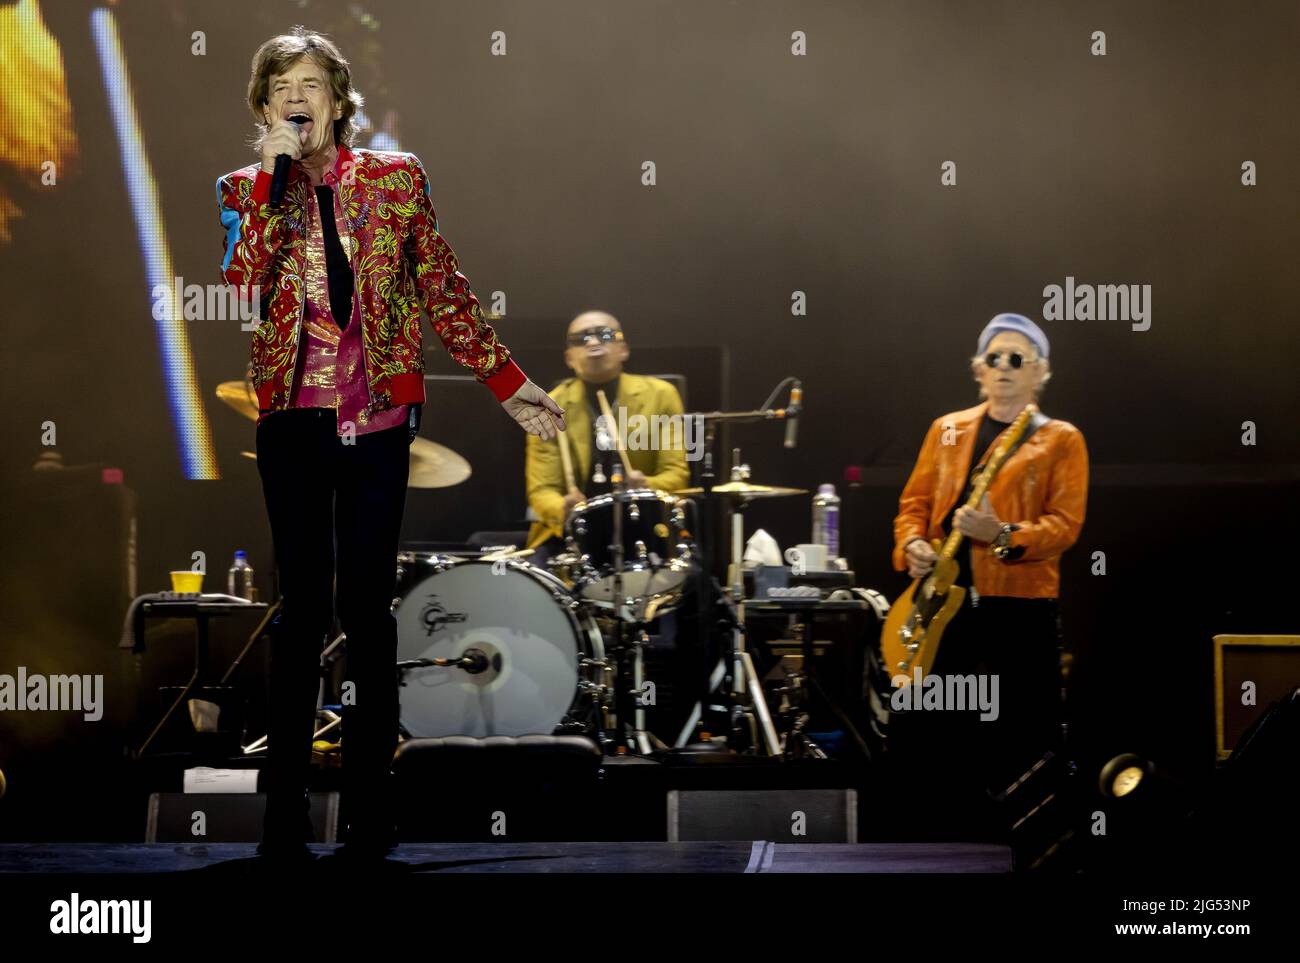 AMSTERDAM - 2022-07-07 20:55:36 AMSTERDAM - Singer Mick Jagger during the concert of The Rolling Stones in the Johan Cruijff ArenA. With the SIXTY tour, Mick Jagger, Keith Richards and Ronnie Wood make their long-awaited return. ANP KIPPA ROBIN VAN LONKHUIJSEN netherlands out - belgium out Stock Photo